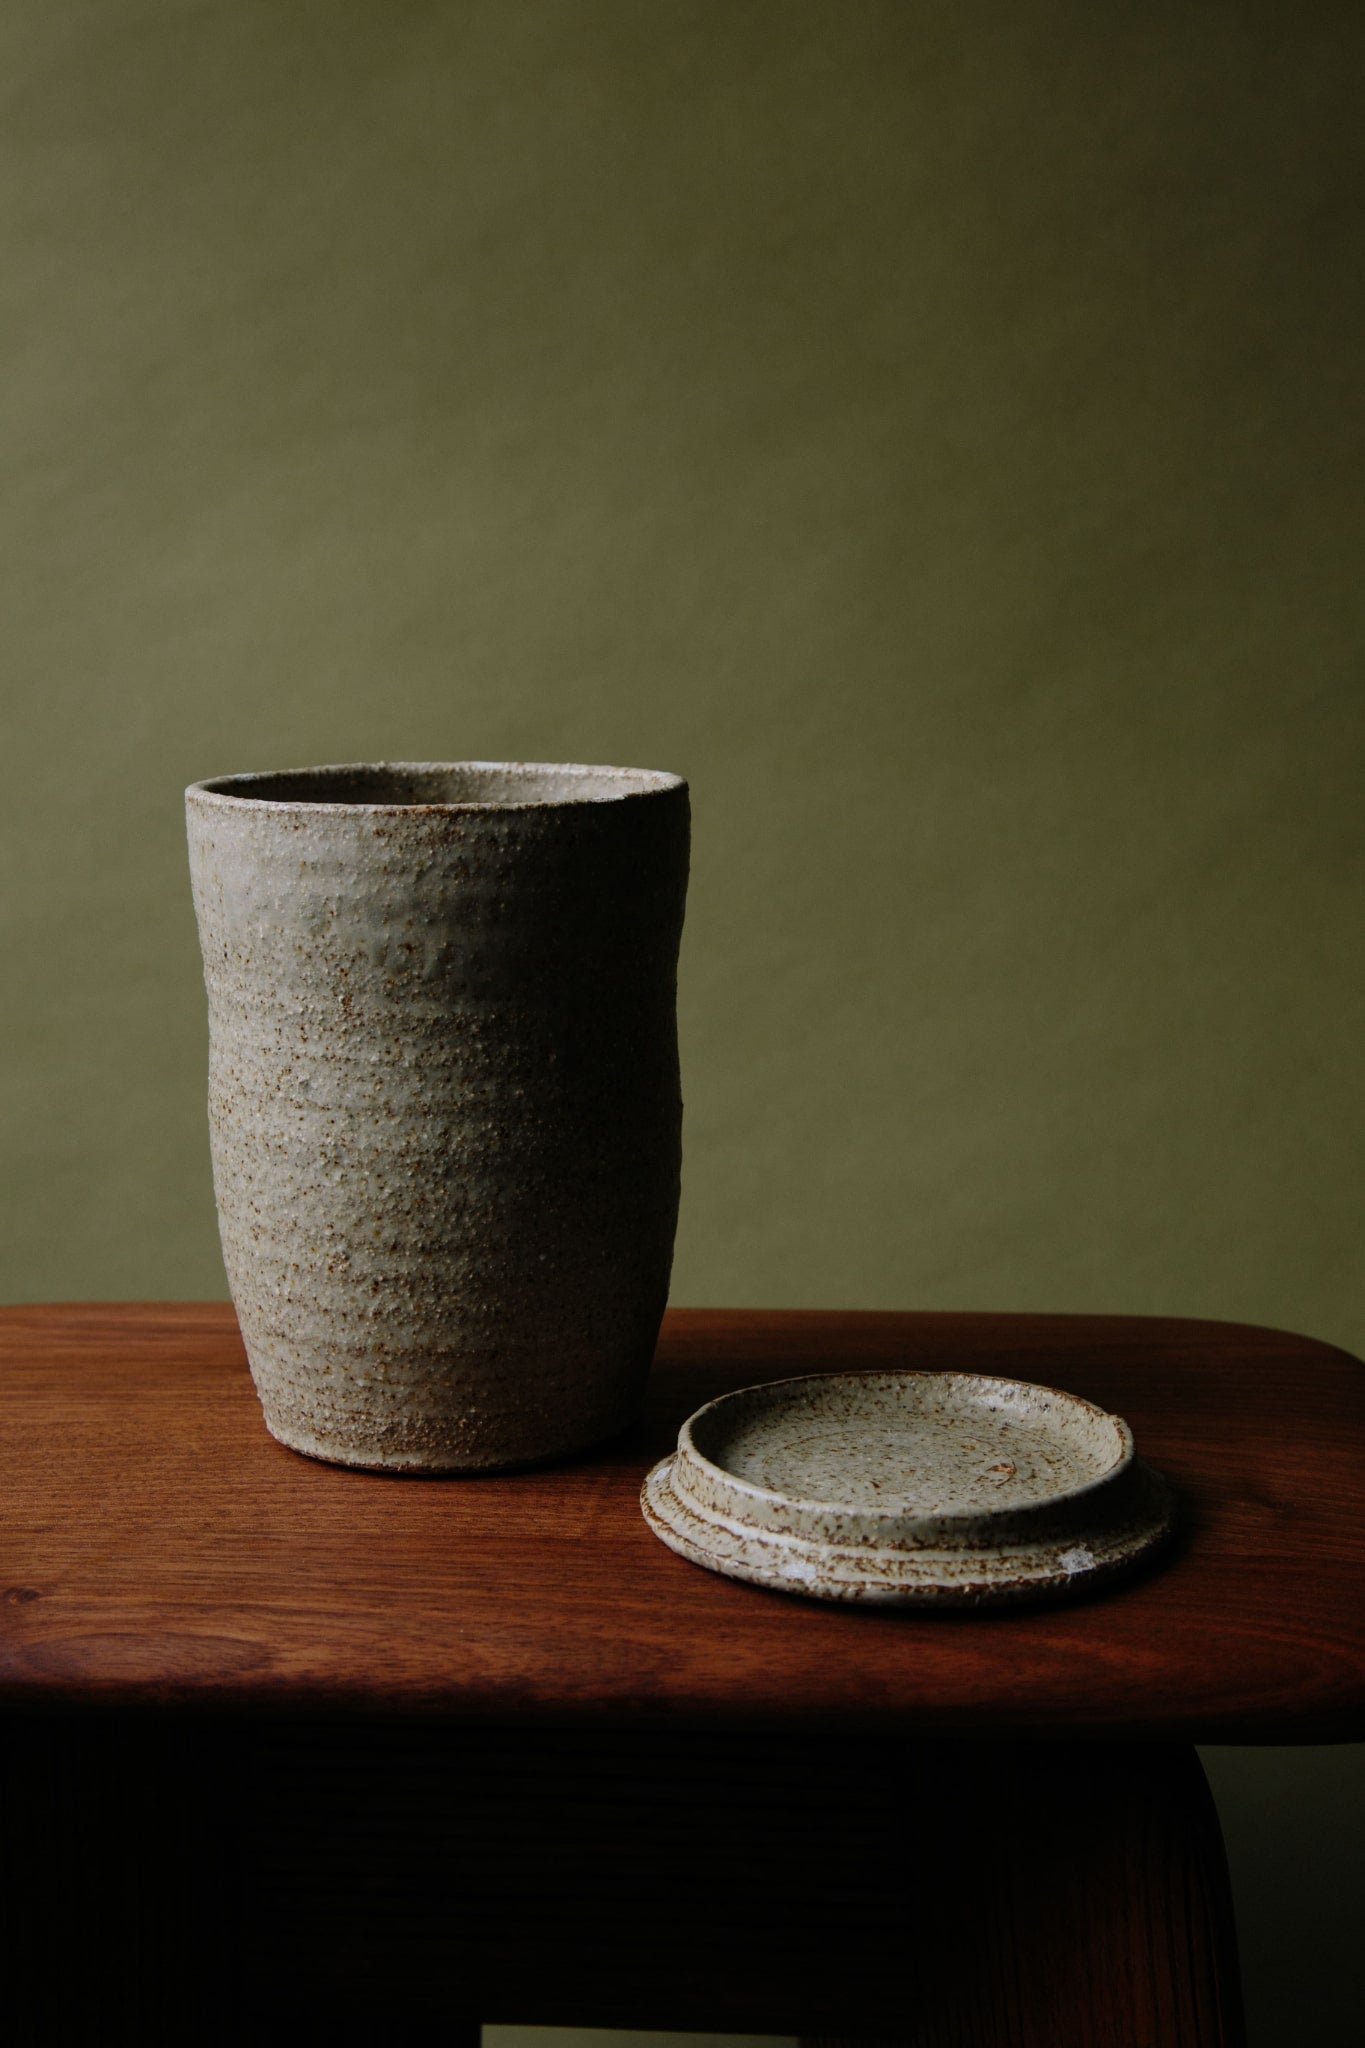 ALT=A textured ceramic jar with a lid photographed on a wooden stool against an olive green background. The lid has been taken off and placed next to the jar.